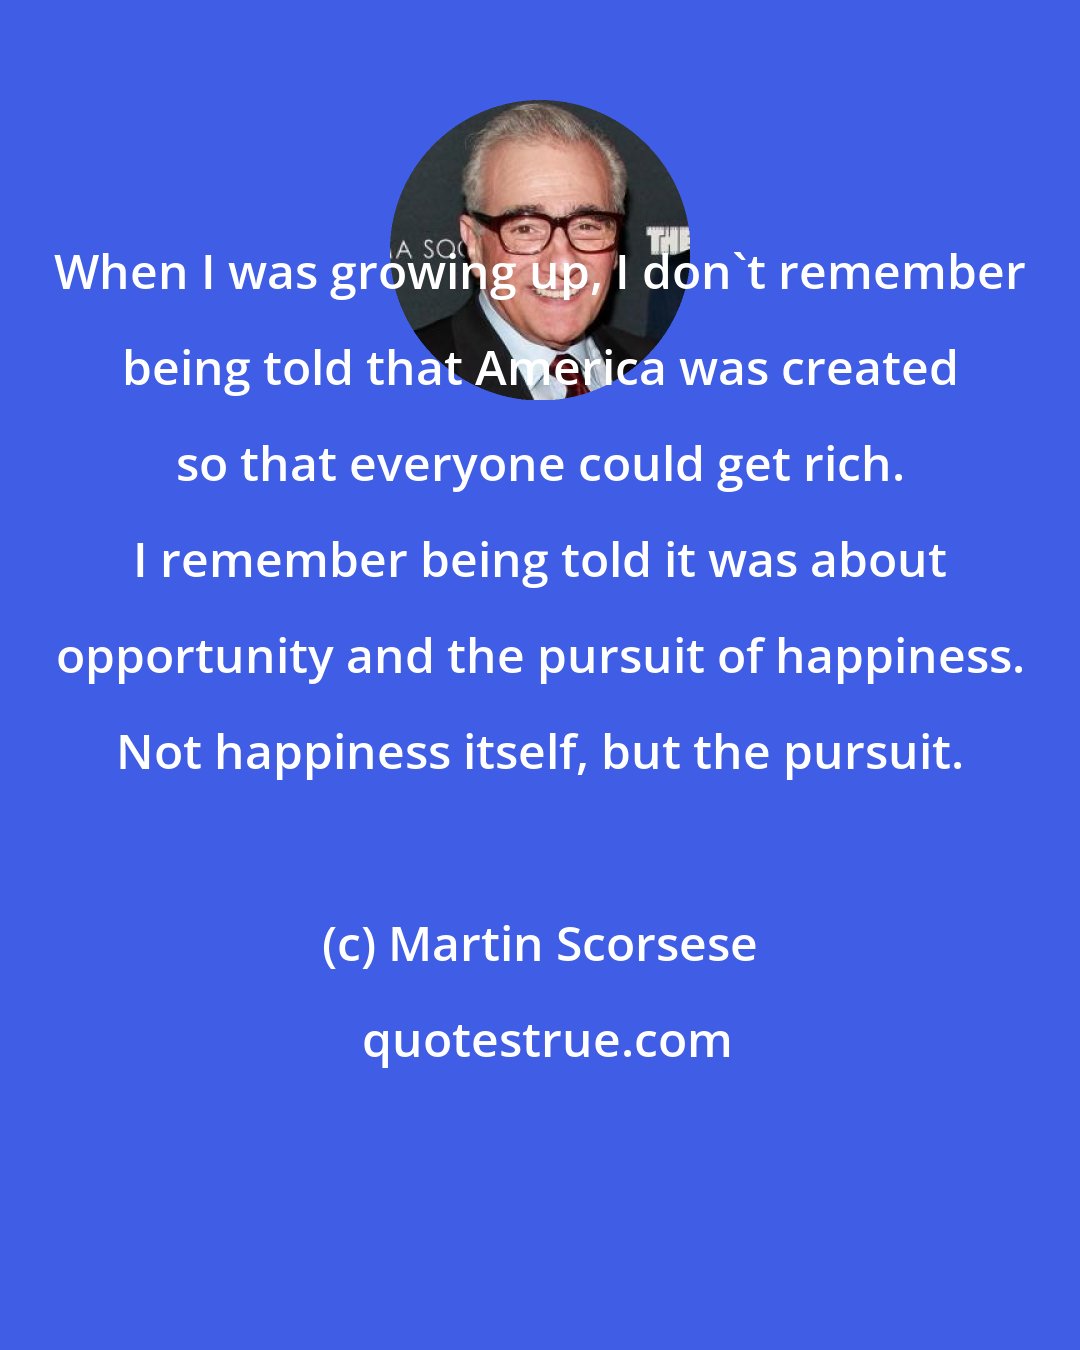 Martin Scorsese: When I was growing up, I don't remember being told that America was created so that everyone could get rich. I remember being told it was about opportunity and the pursuit of happiness. Not happiness itself, but the pursuit.